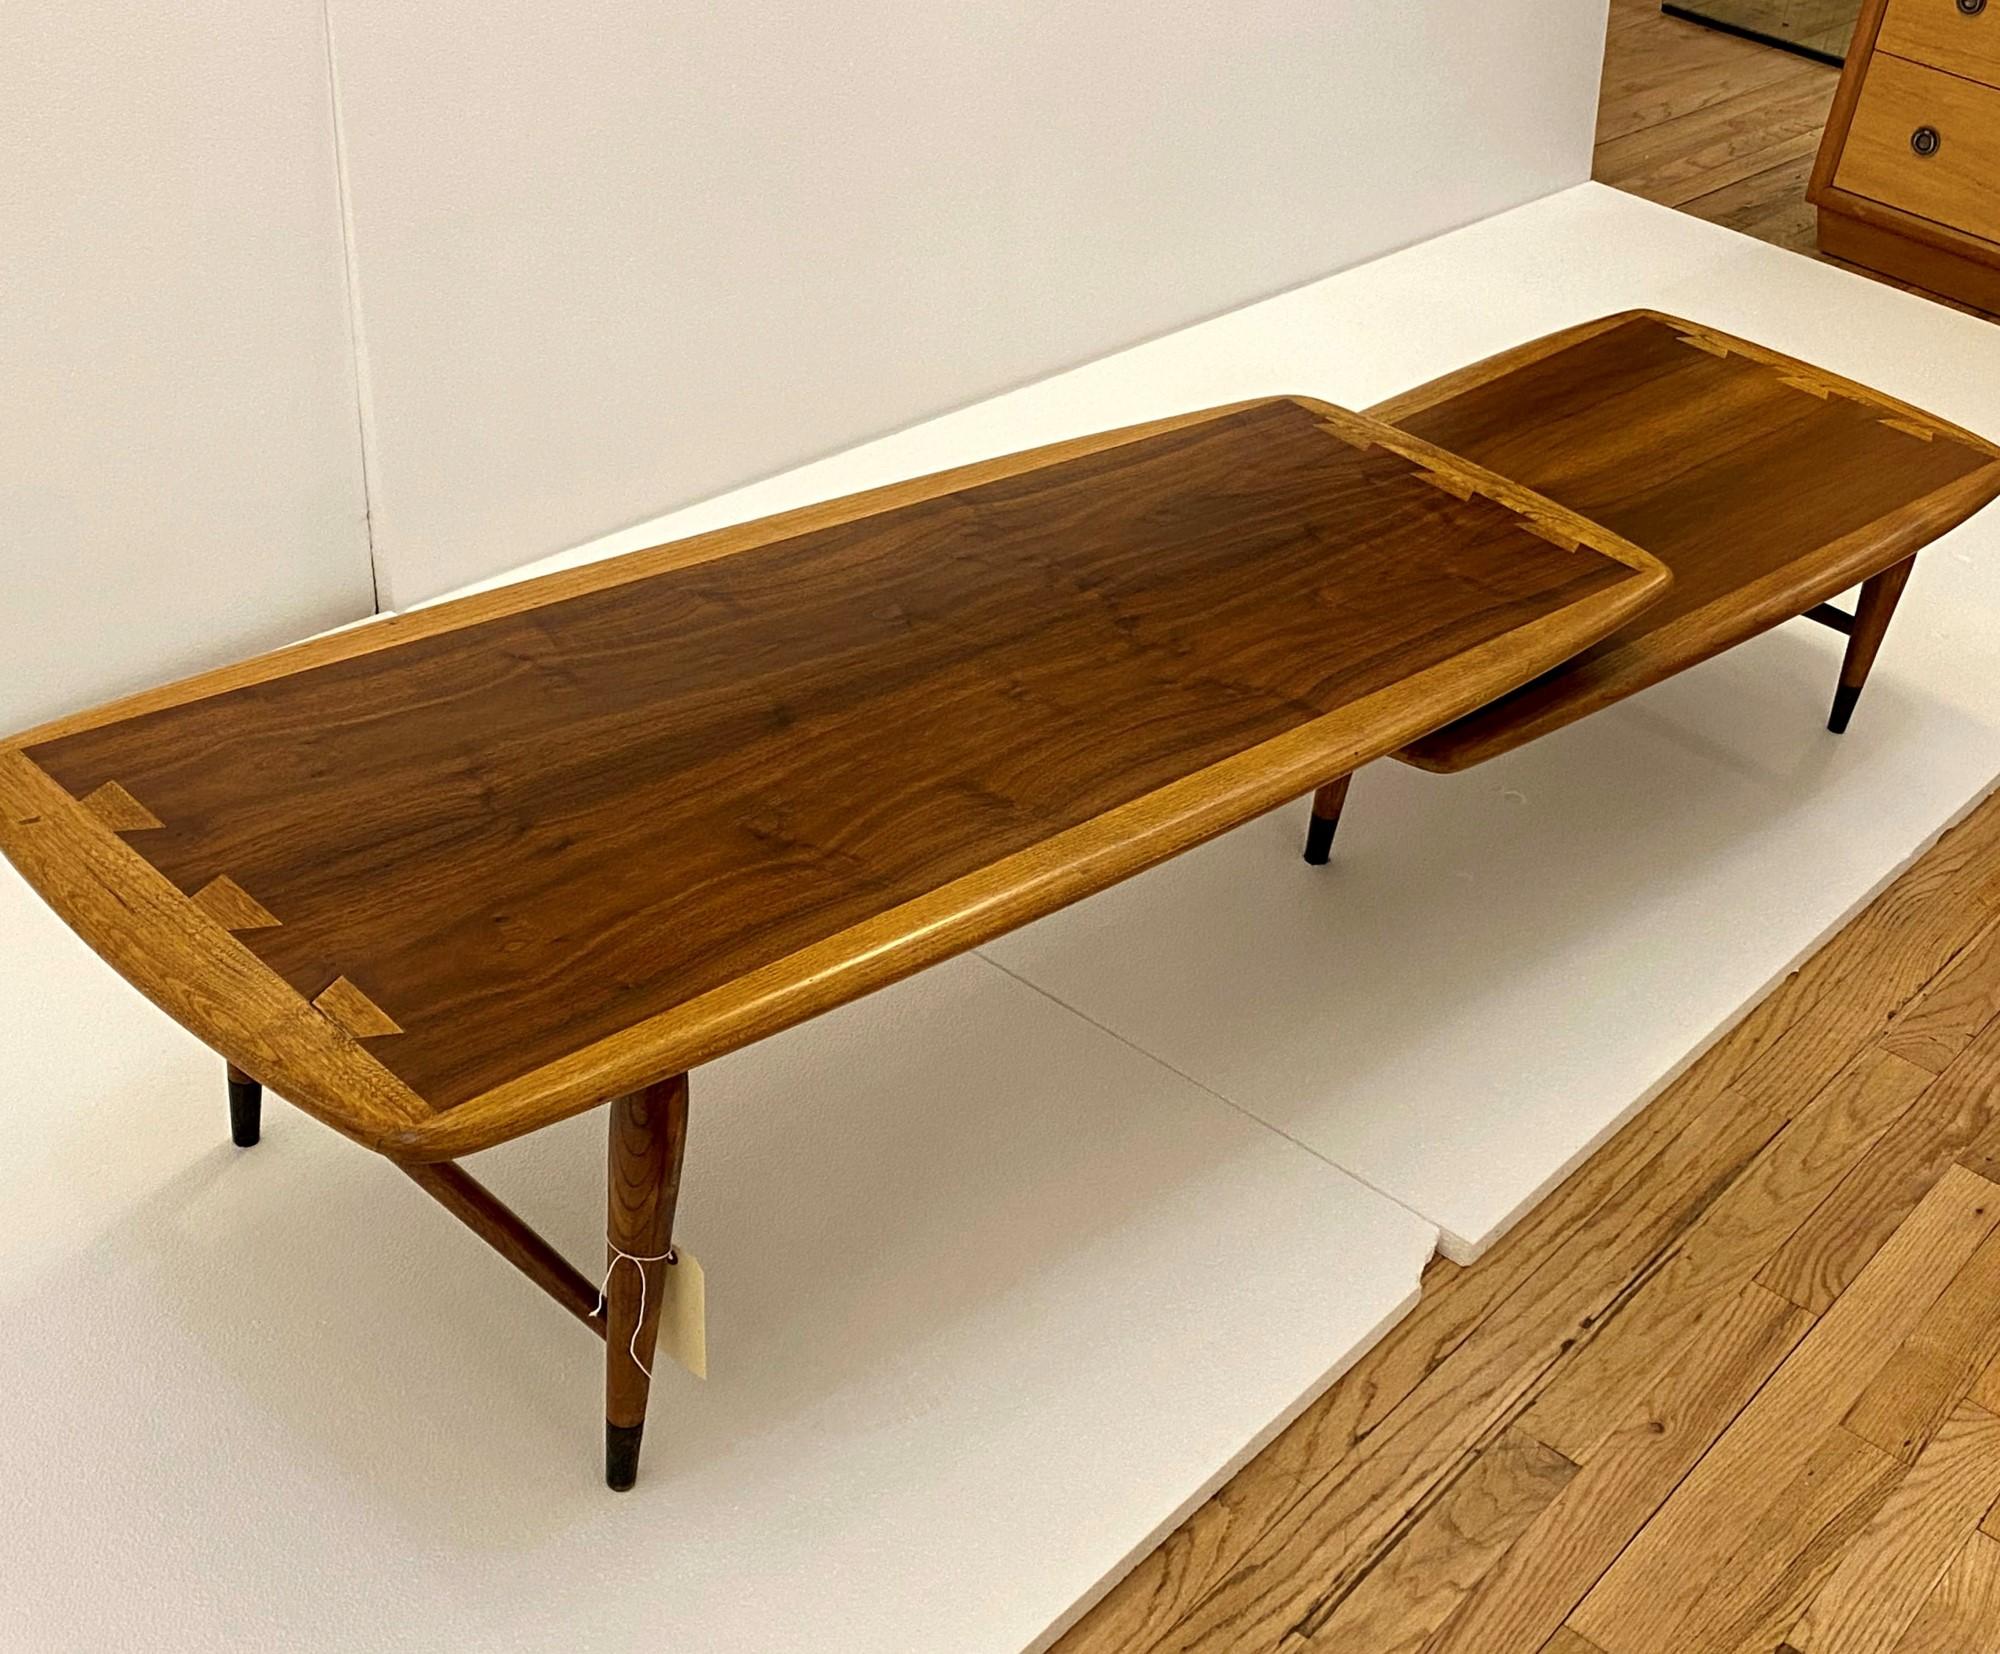 Hickory 1960s Lane Switchblade Coffee Table Acclaim Two-Piece Adjustable by Andre Bus